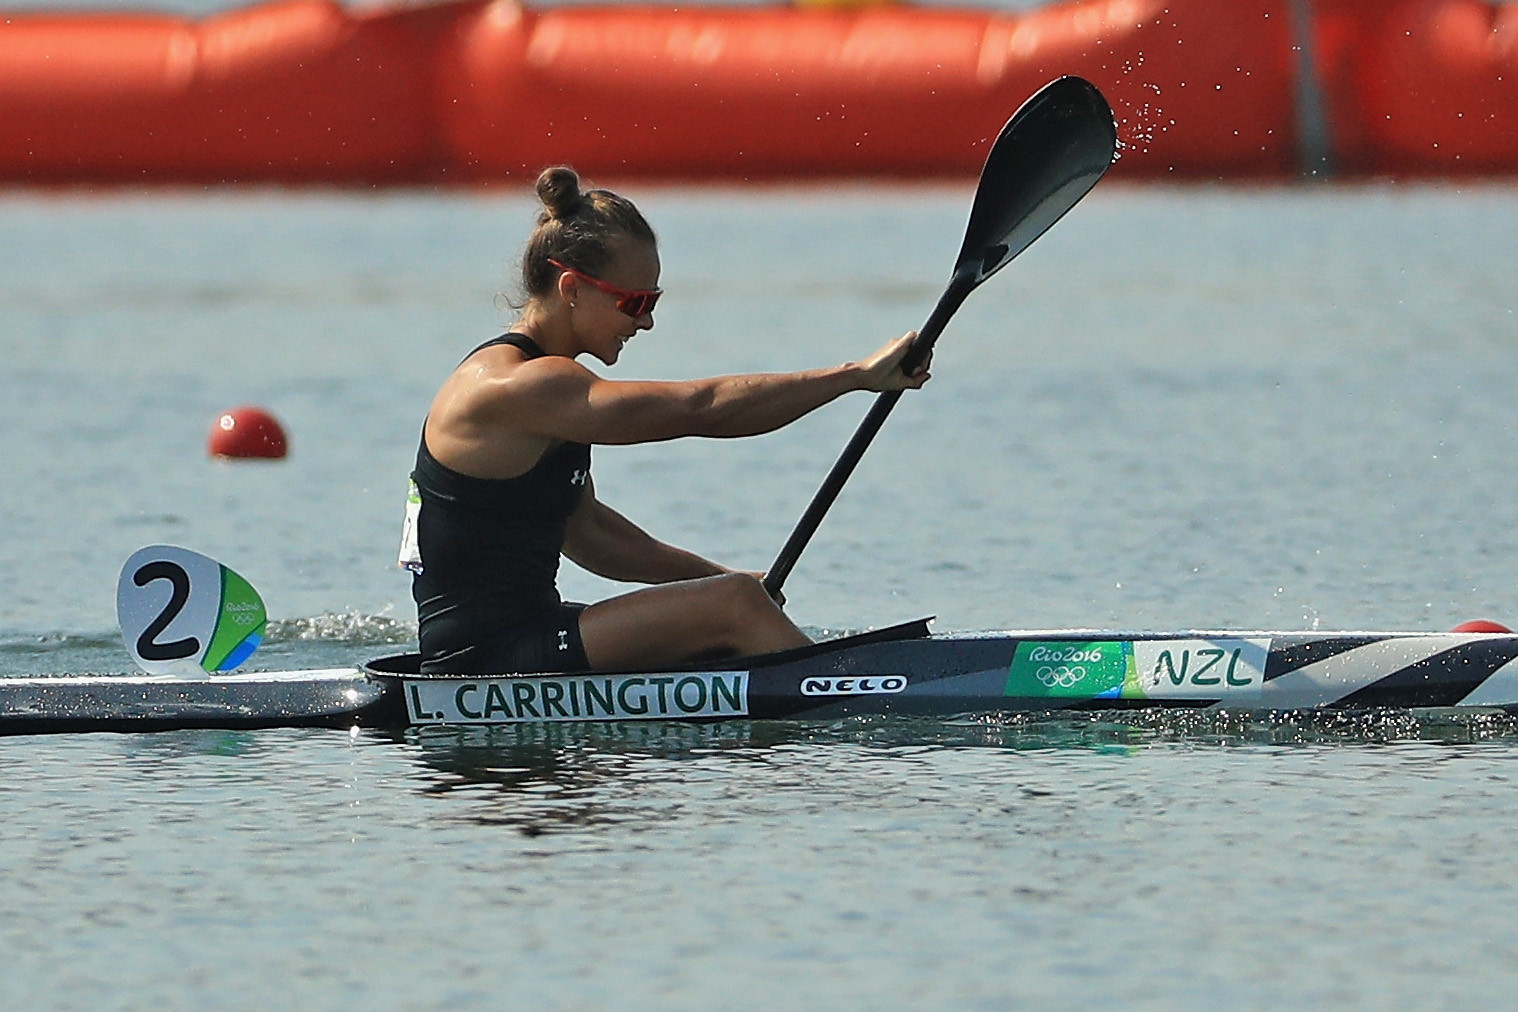 Olympic champion Lisa Carrington topped the women's K1 200m heat at the ICF Canoe Sprint World Cup ©Getty Images